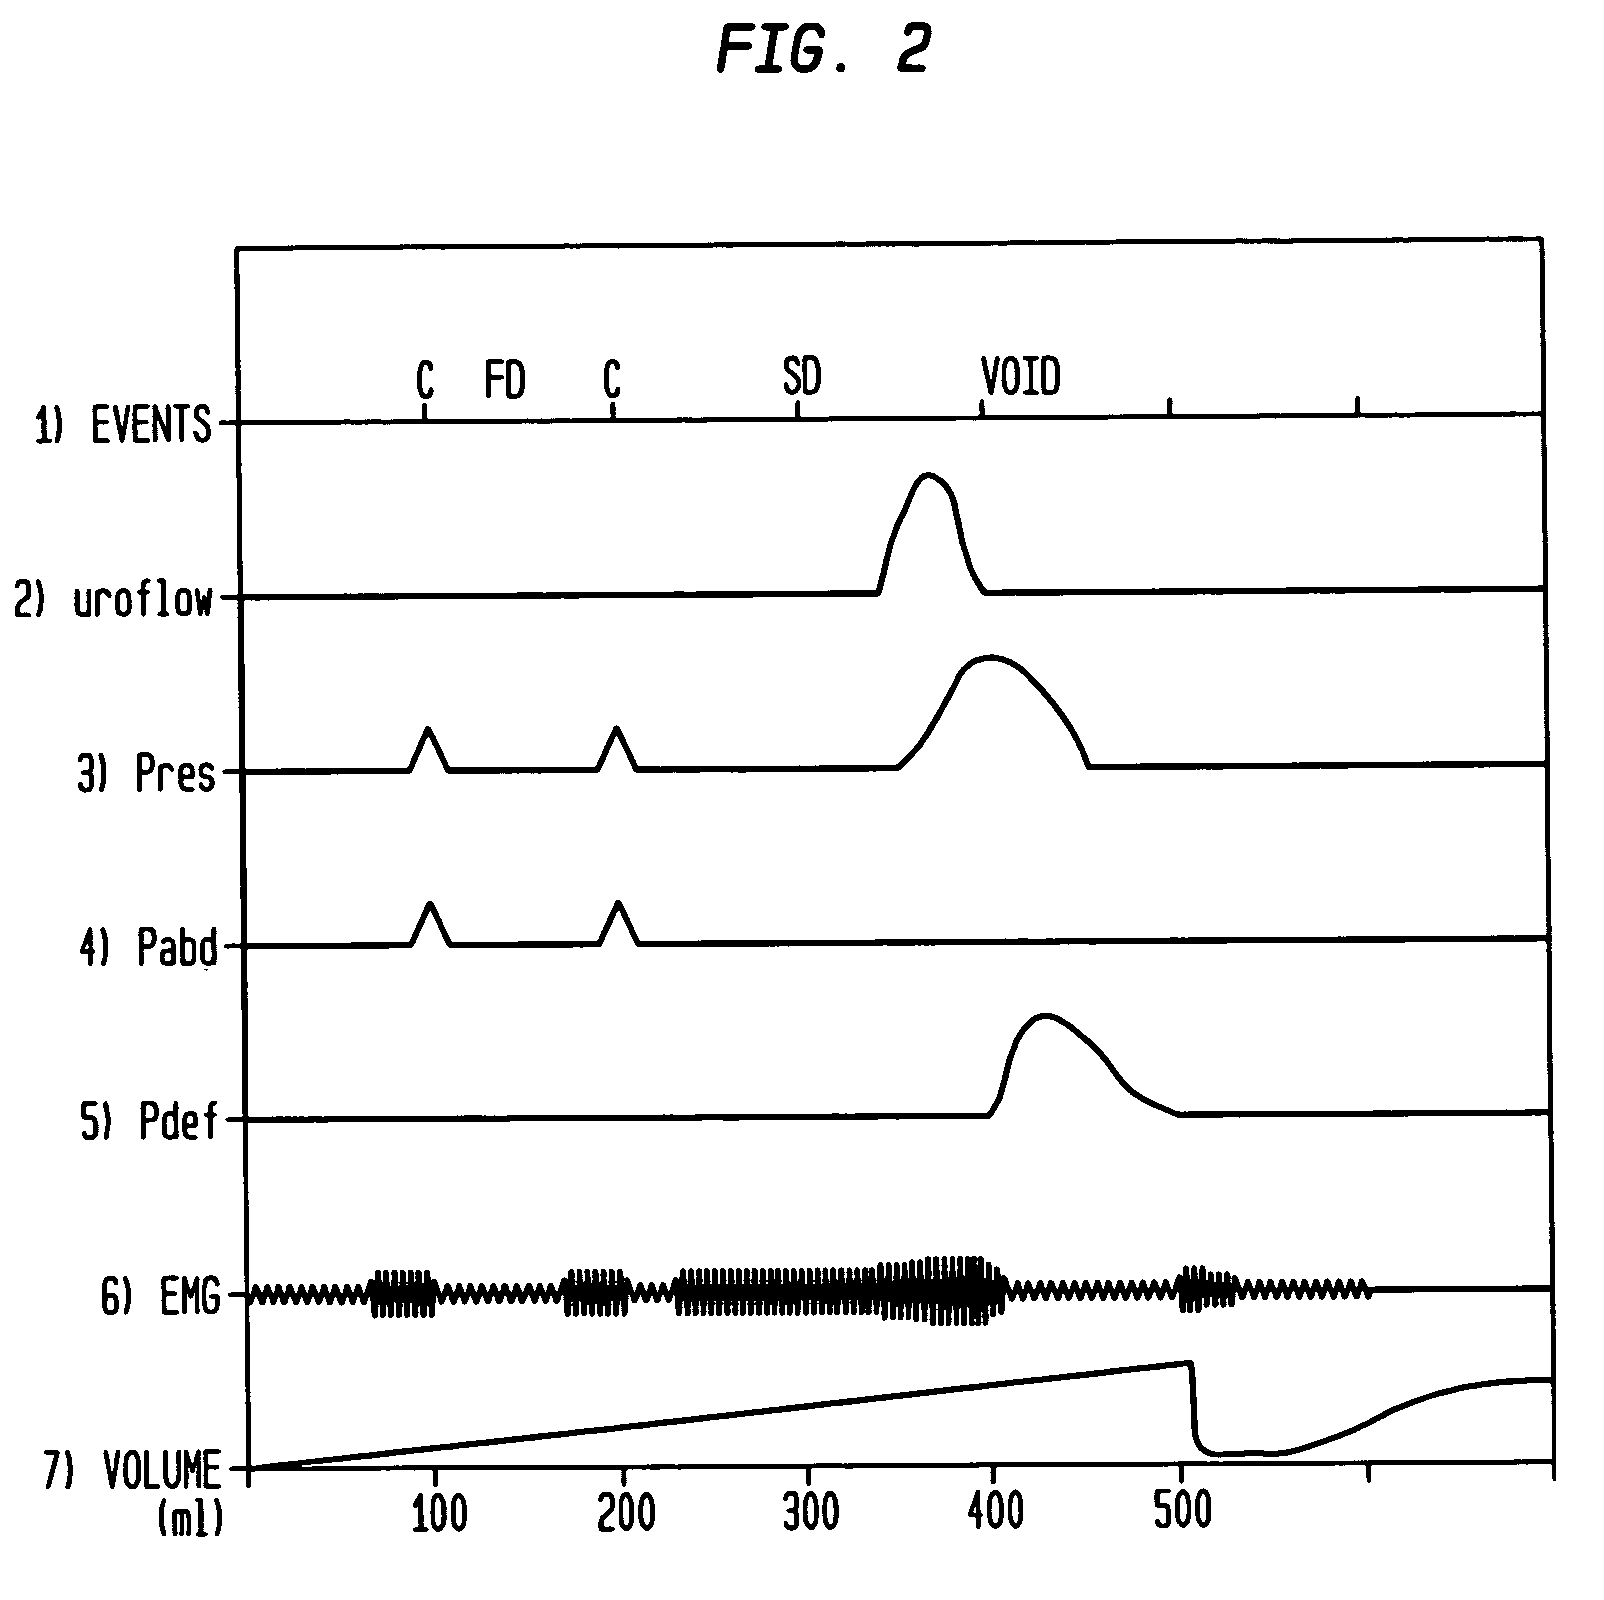 Method and apparatus for measuring bladder electrical activity to diagnose bladder dysfunction